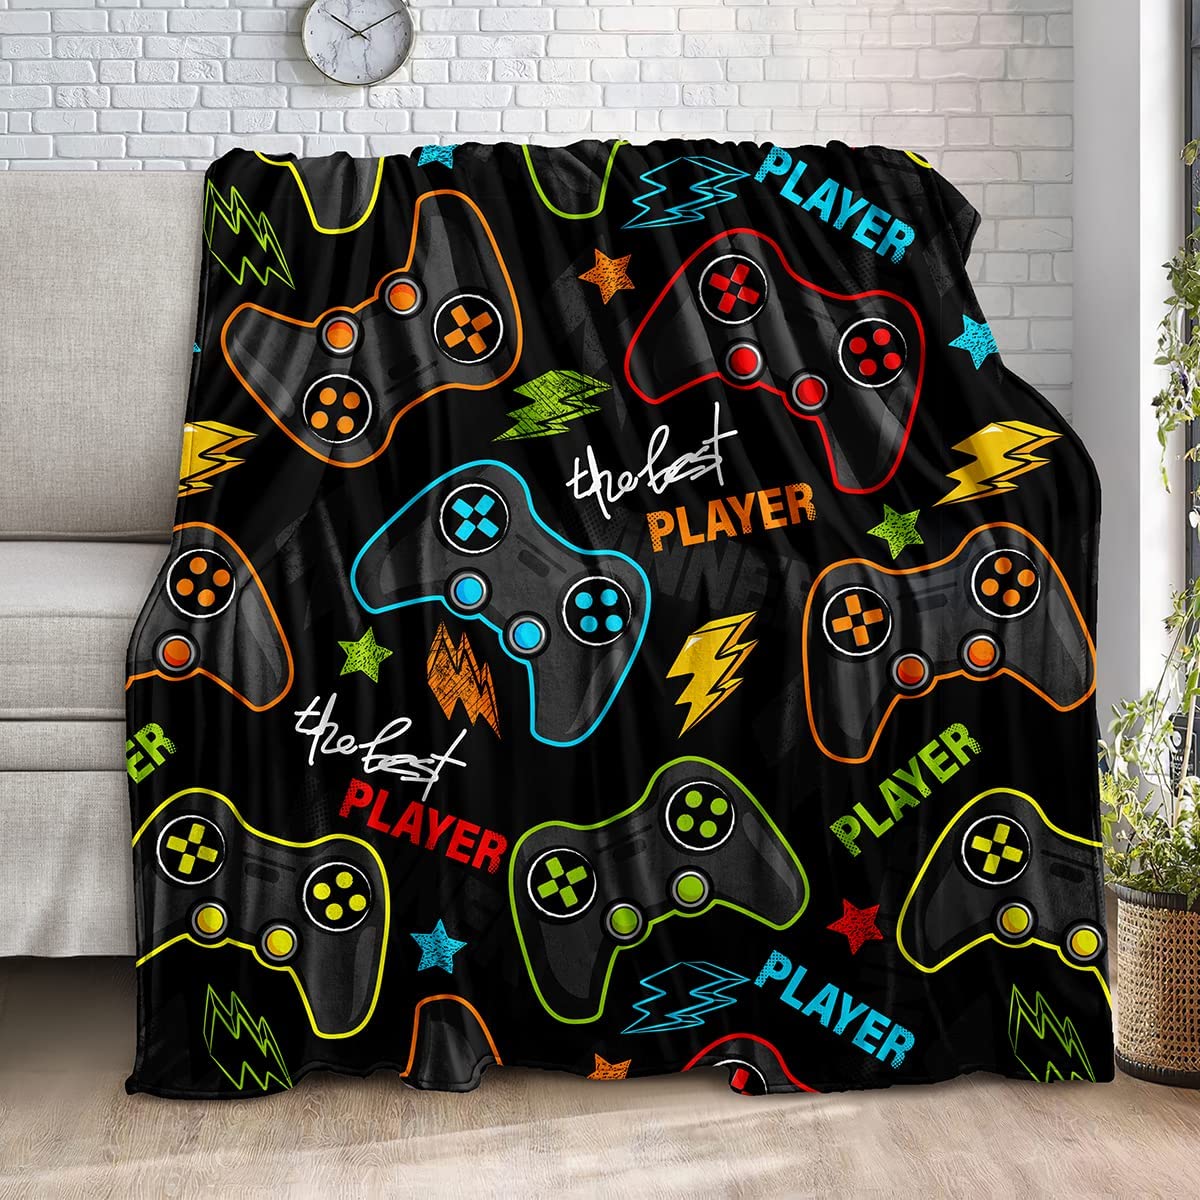 lirs Bedding Gaming Throw Blanket 60" x 50’’ Super Soft, Fleece, Gamer Gift for Couch Sofa for for Kids Boys Teens Video Game (MT-A11, 60’’x50) - amzGamess